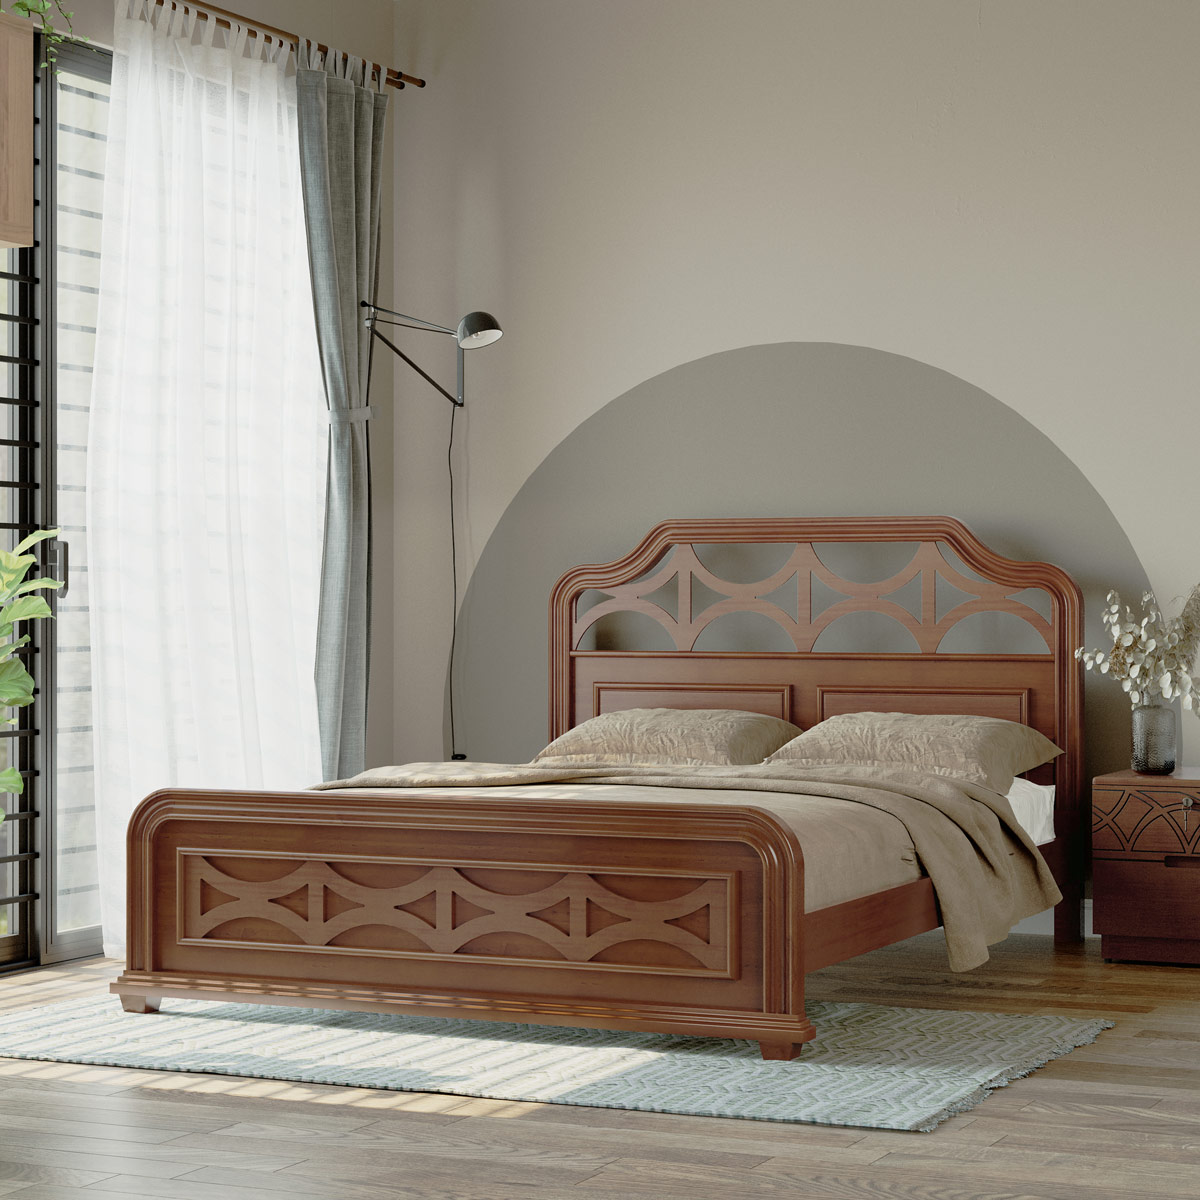 Panam Wooden Double bed I BDH-364-3-1-20